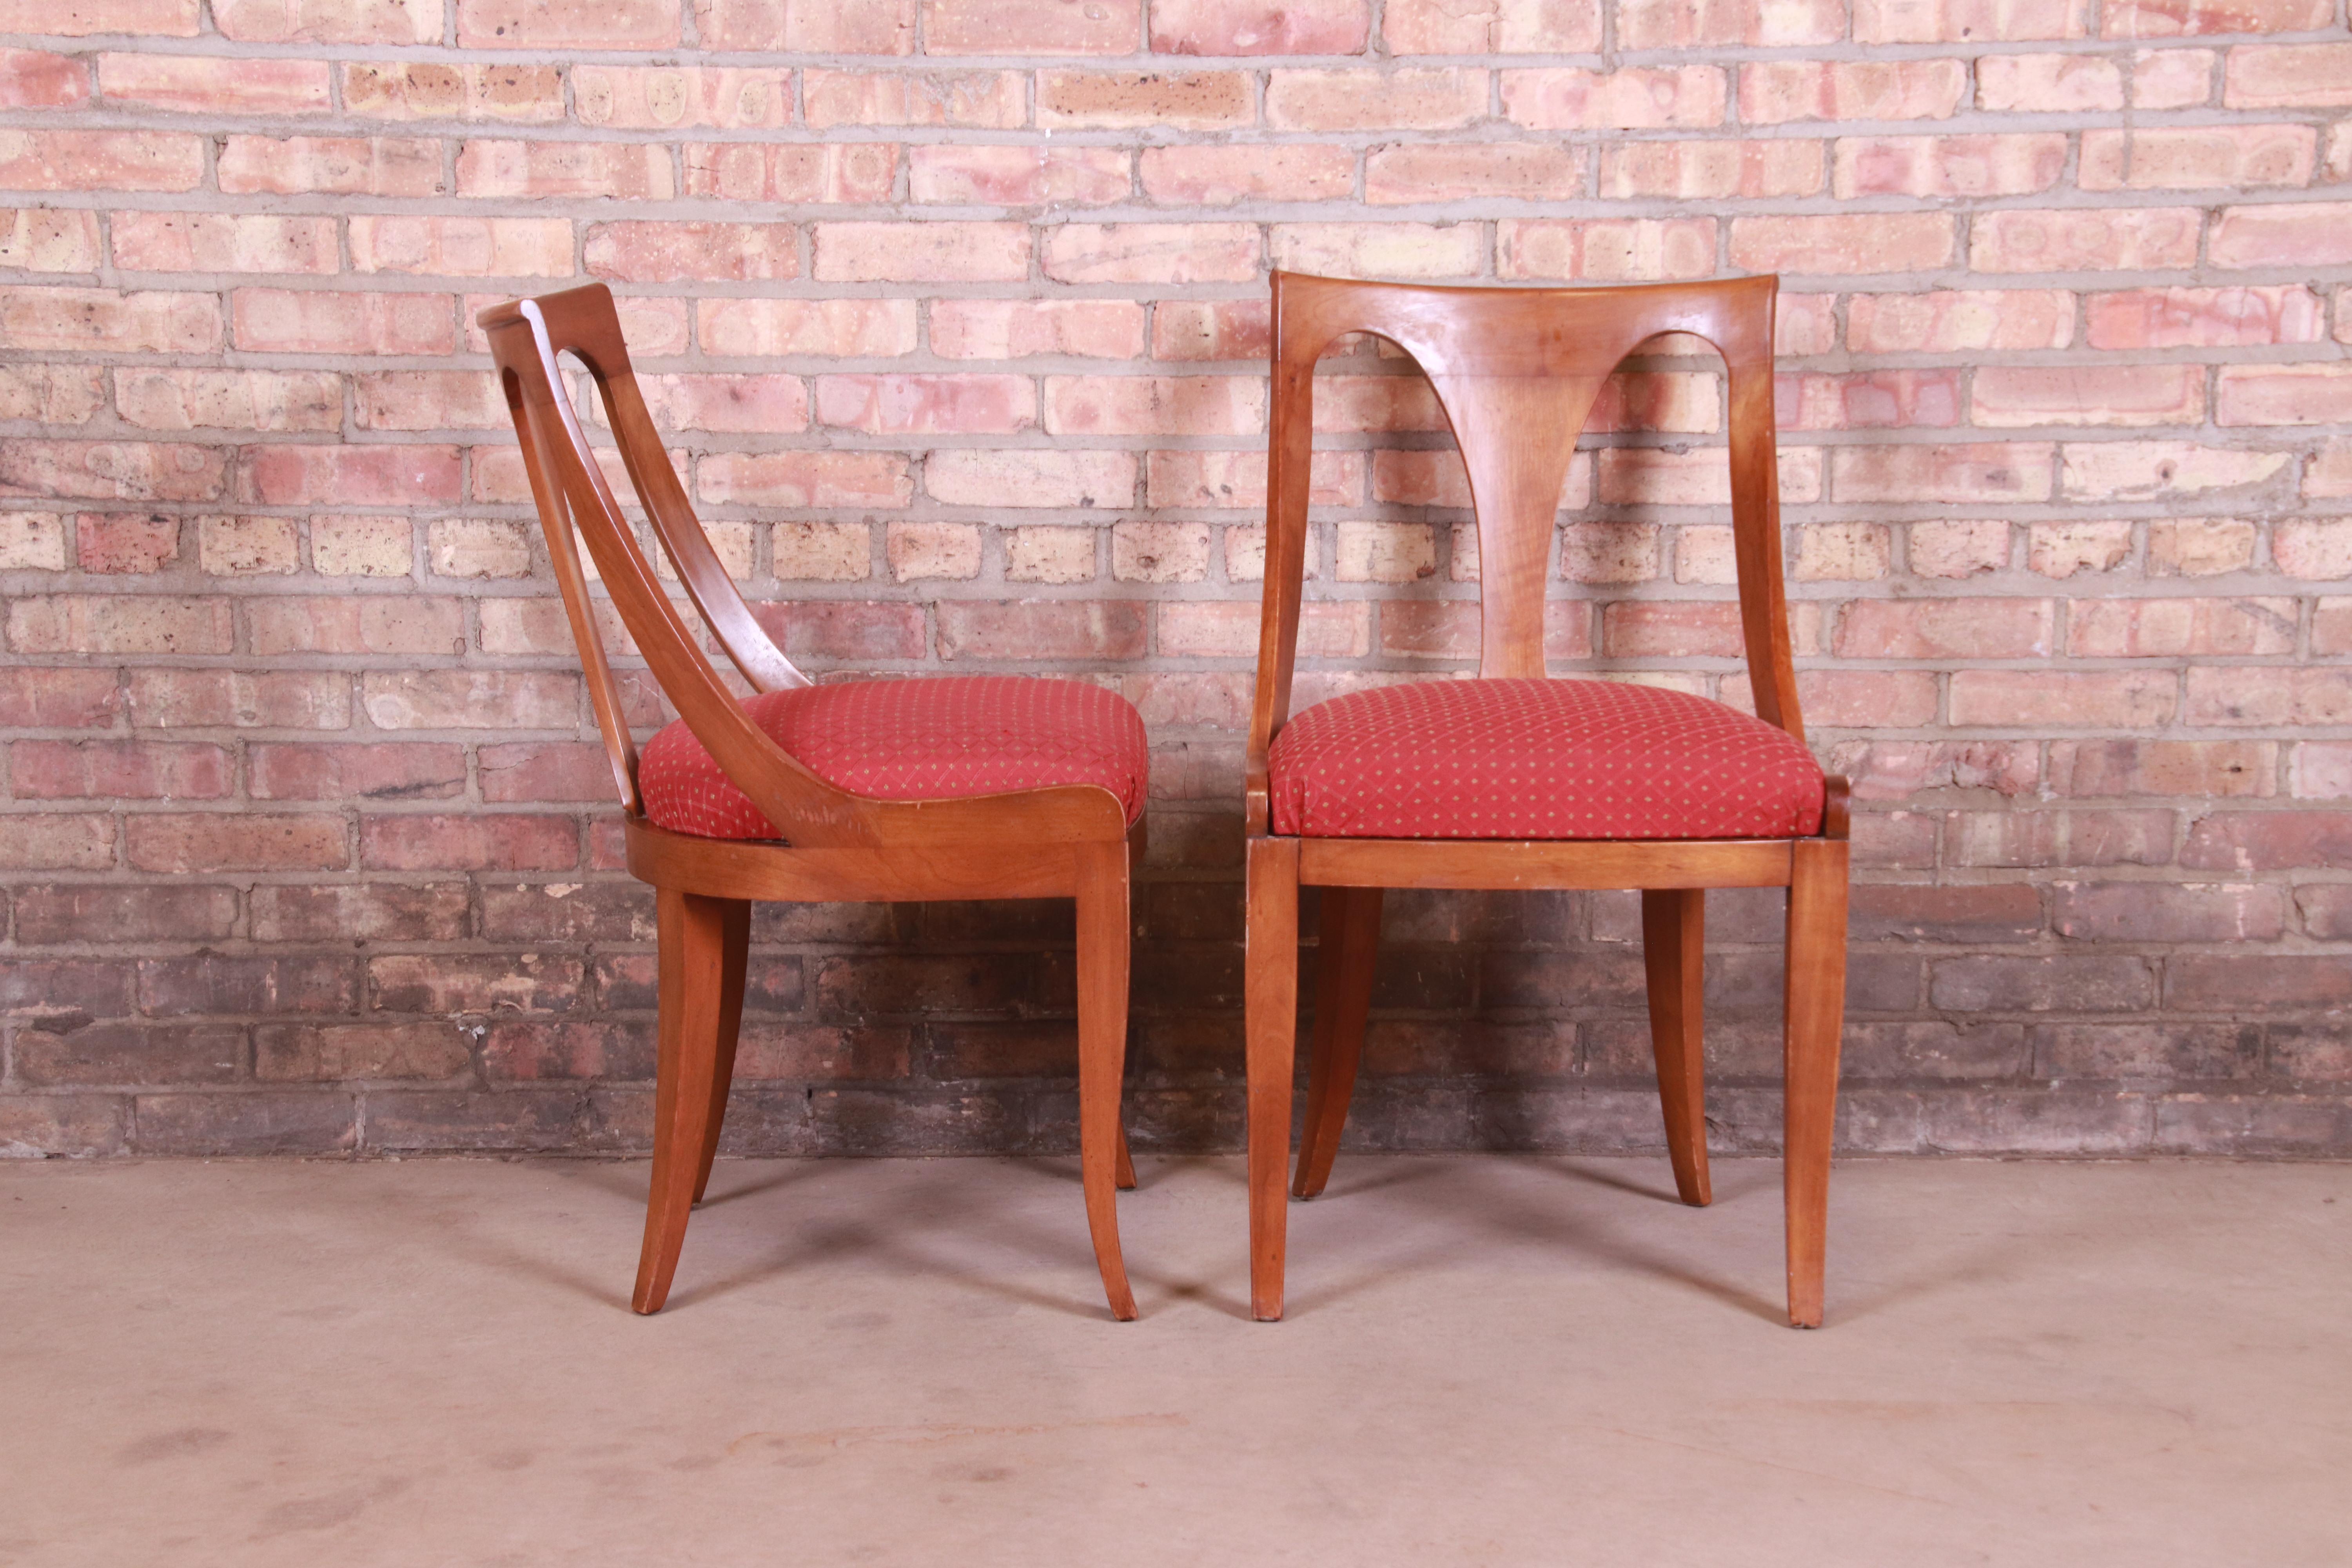 Kindel Furniture Regency Cherry Wood Dining Chairs, Set of Six 3